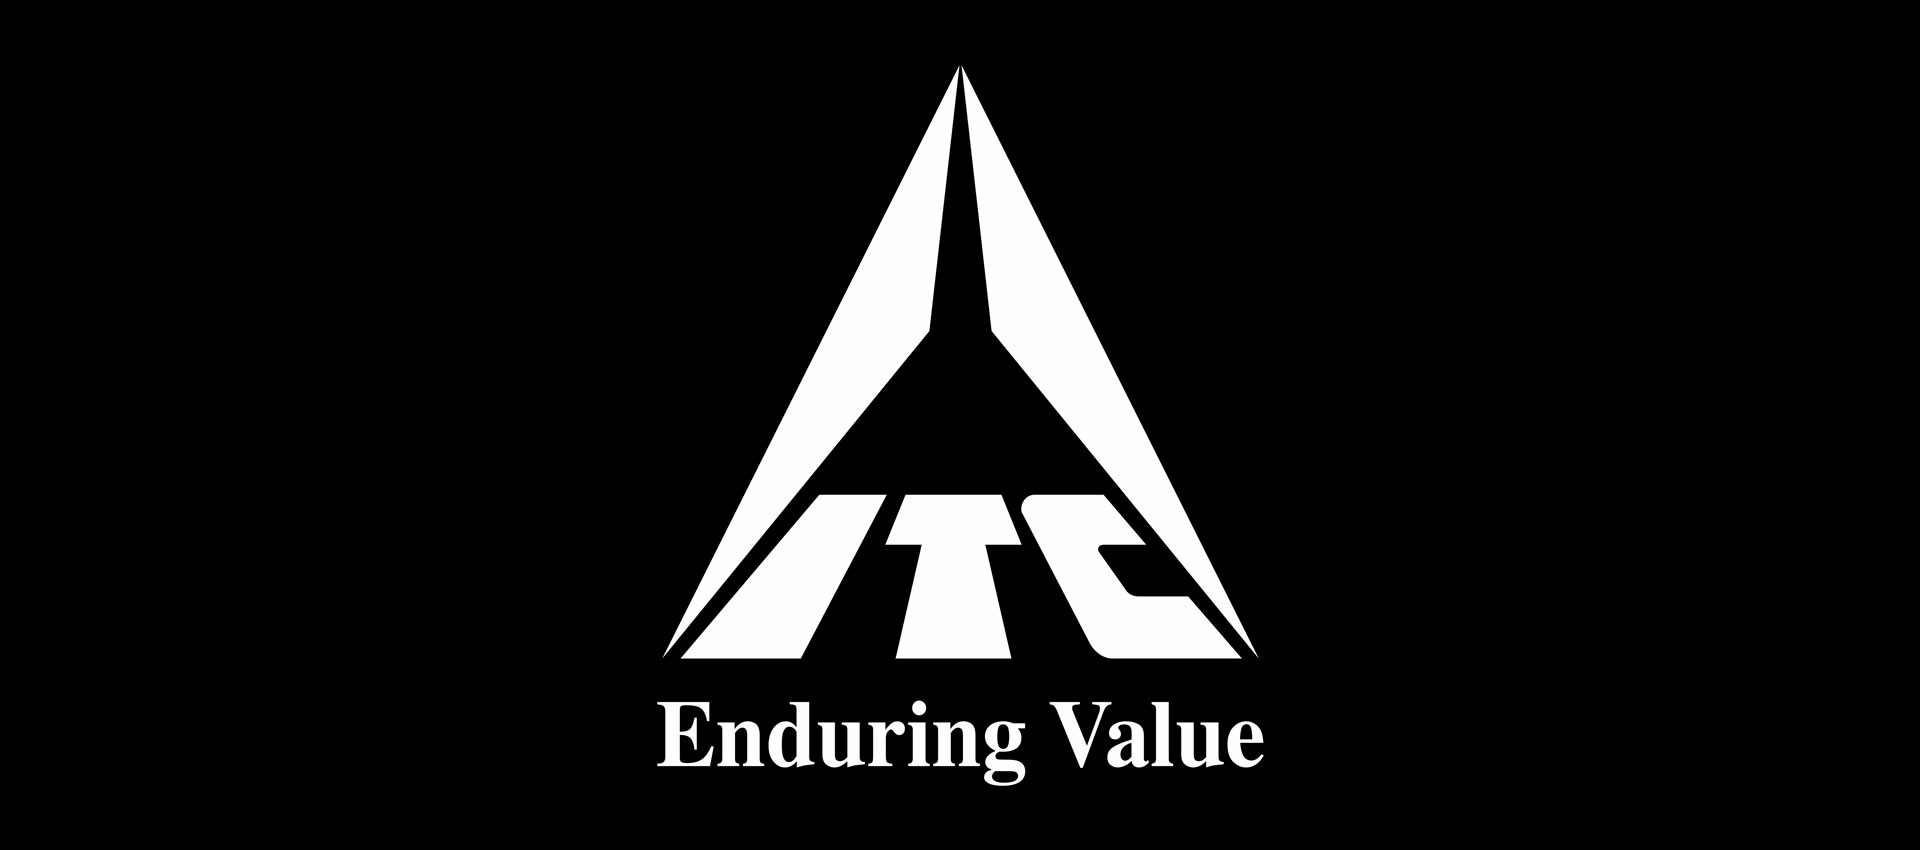 ITC dividend